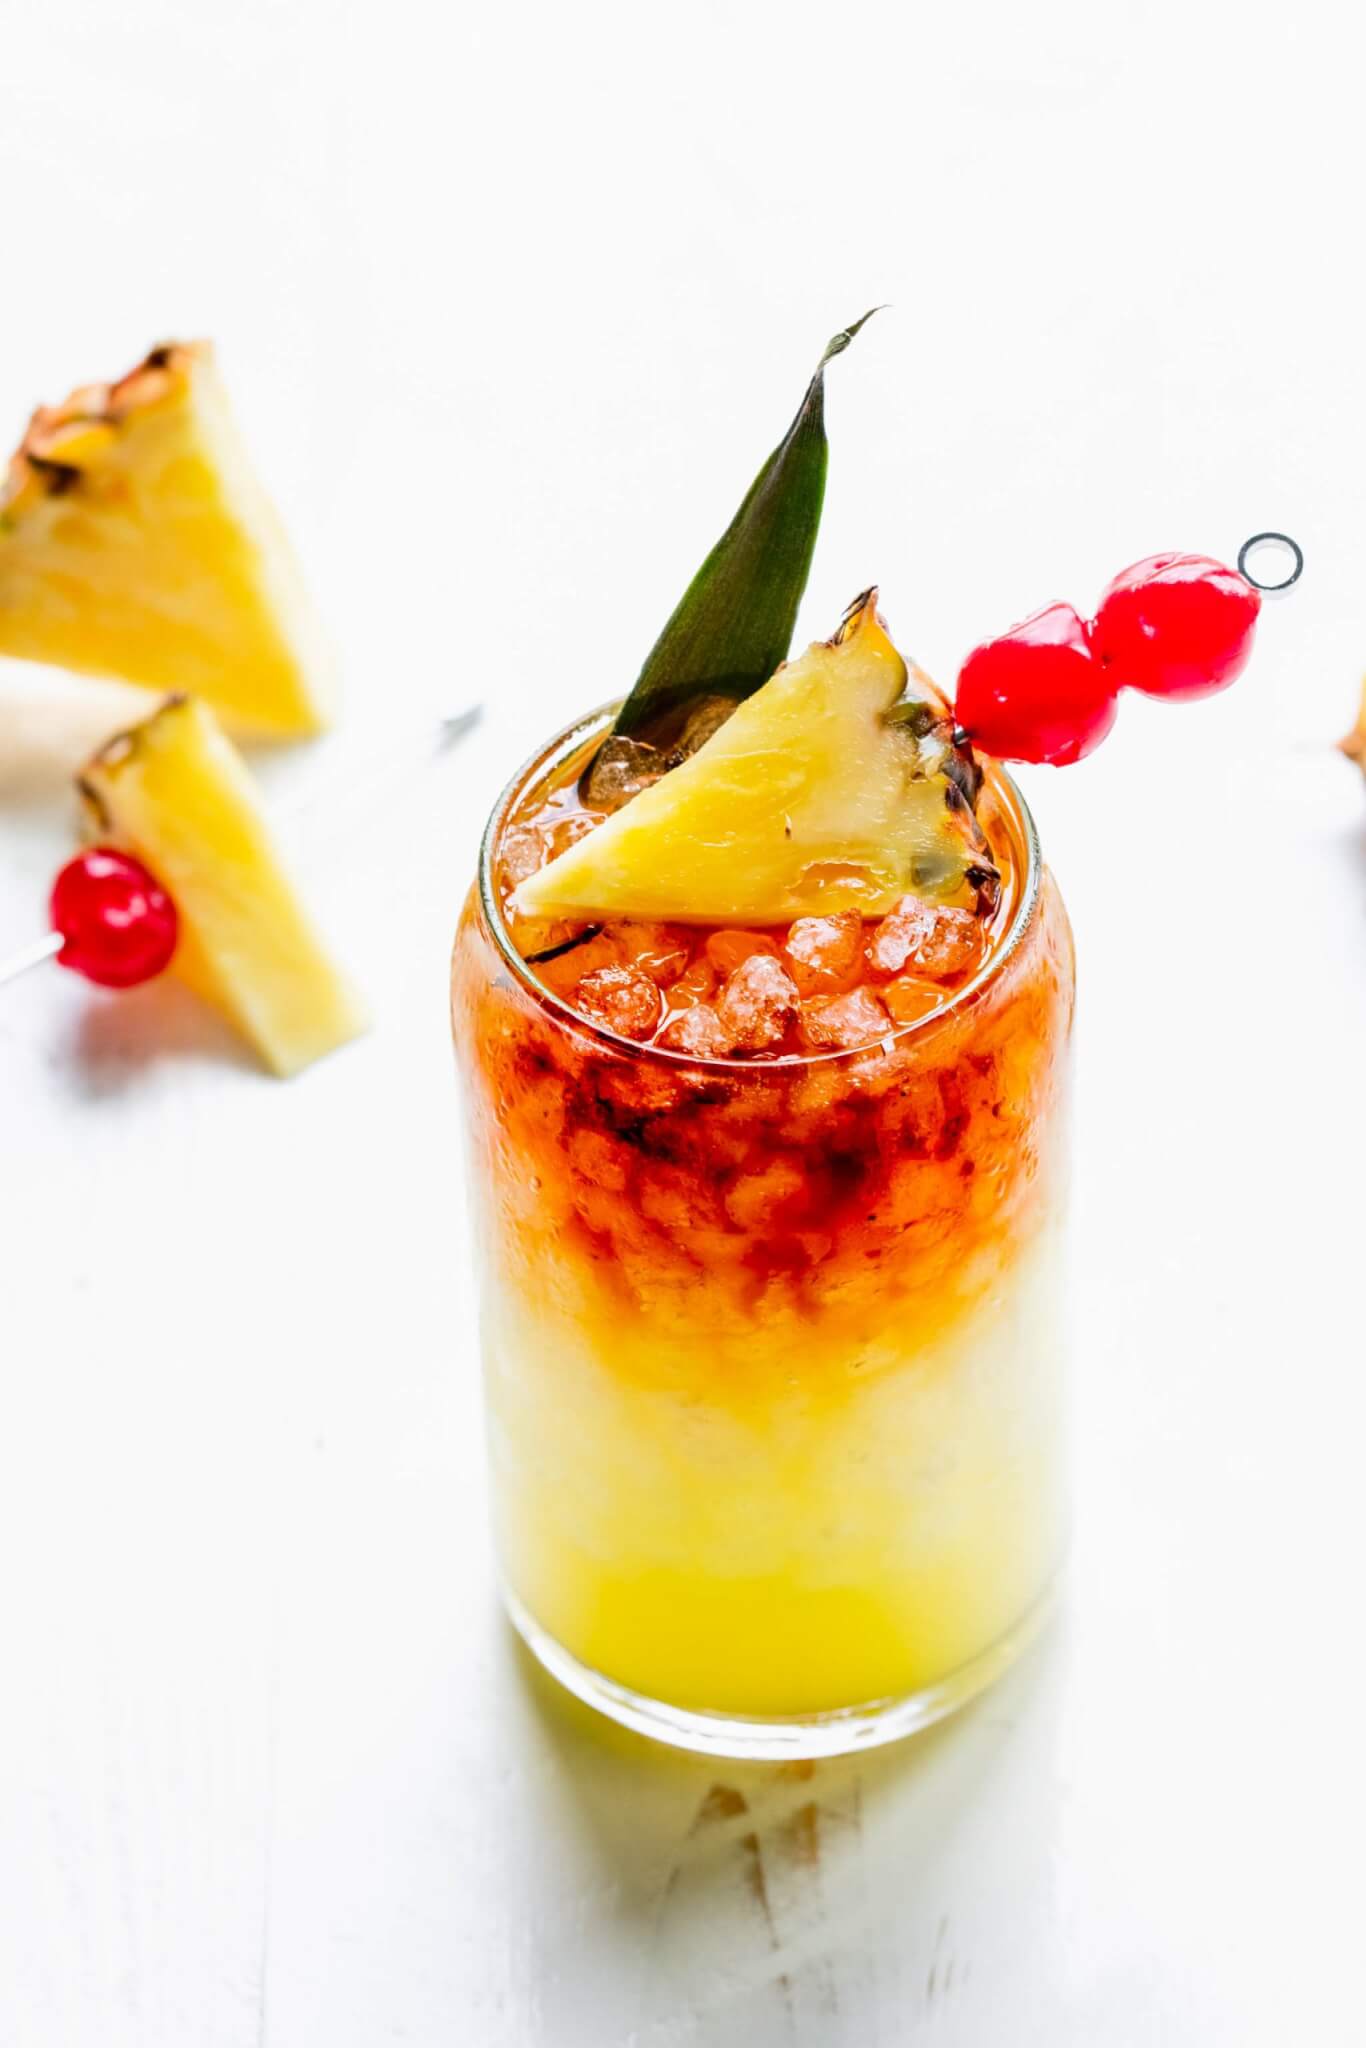 Mai tai in glass garnished with pineapple wedge and cherries.